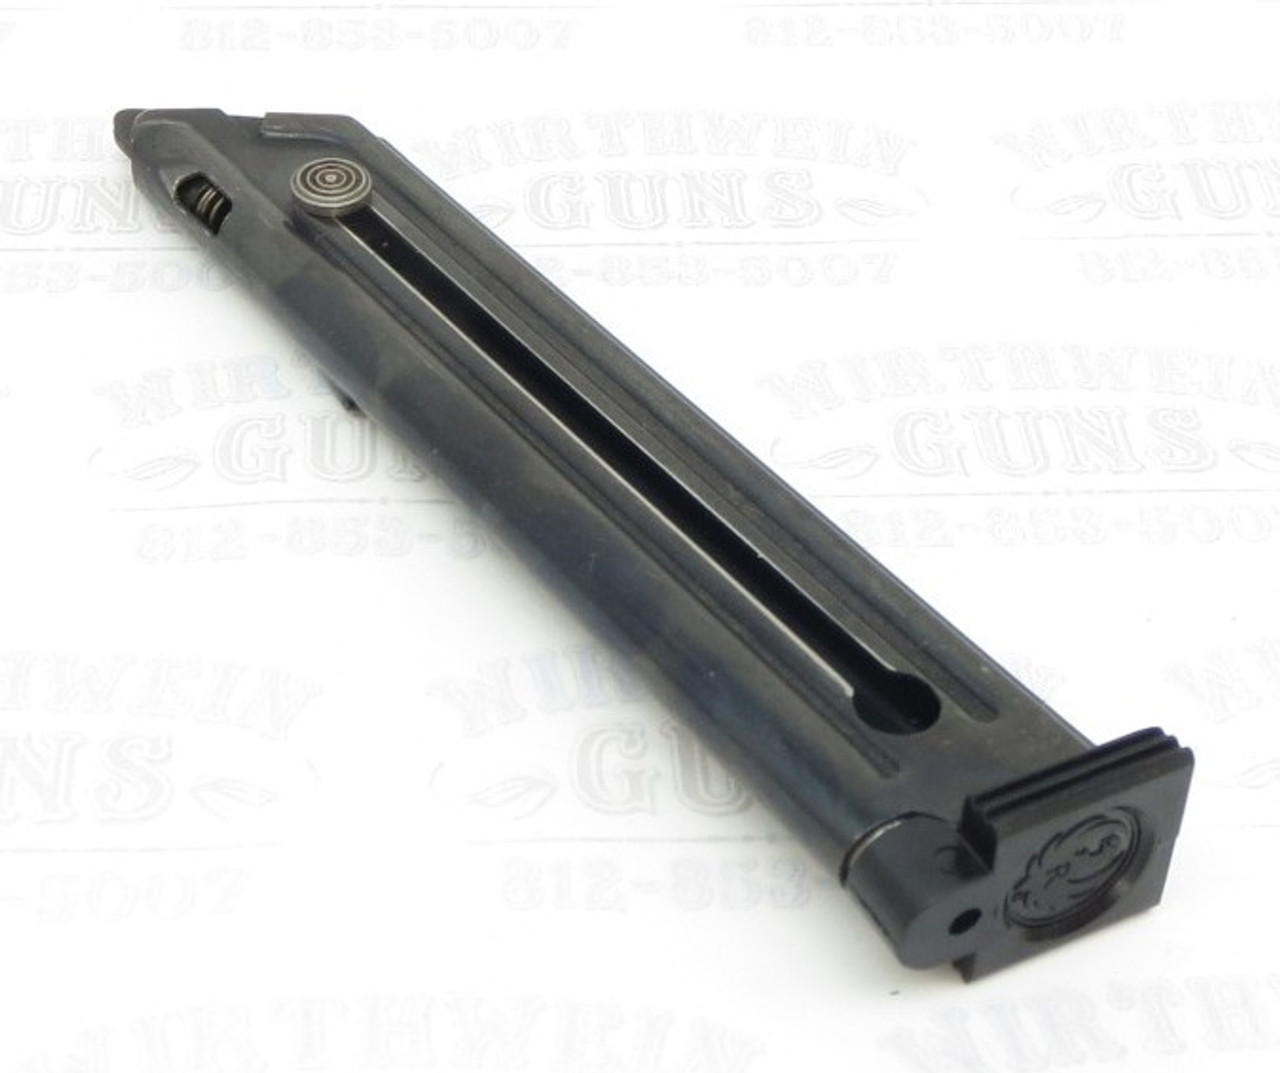 USED Ruger 90231 Magazine for MK3 and MK4